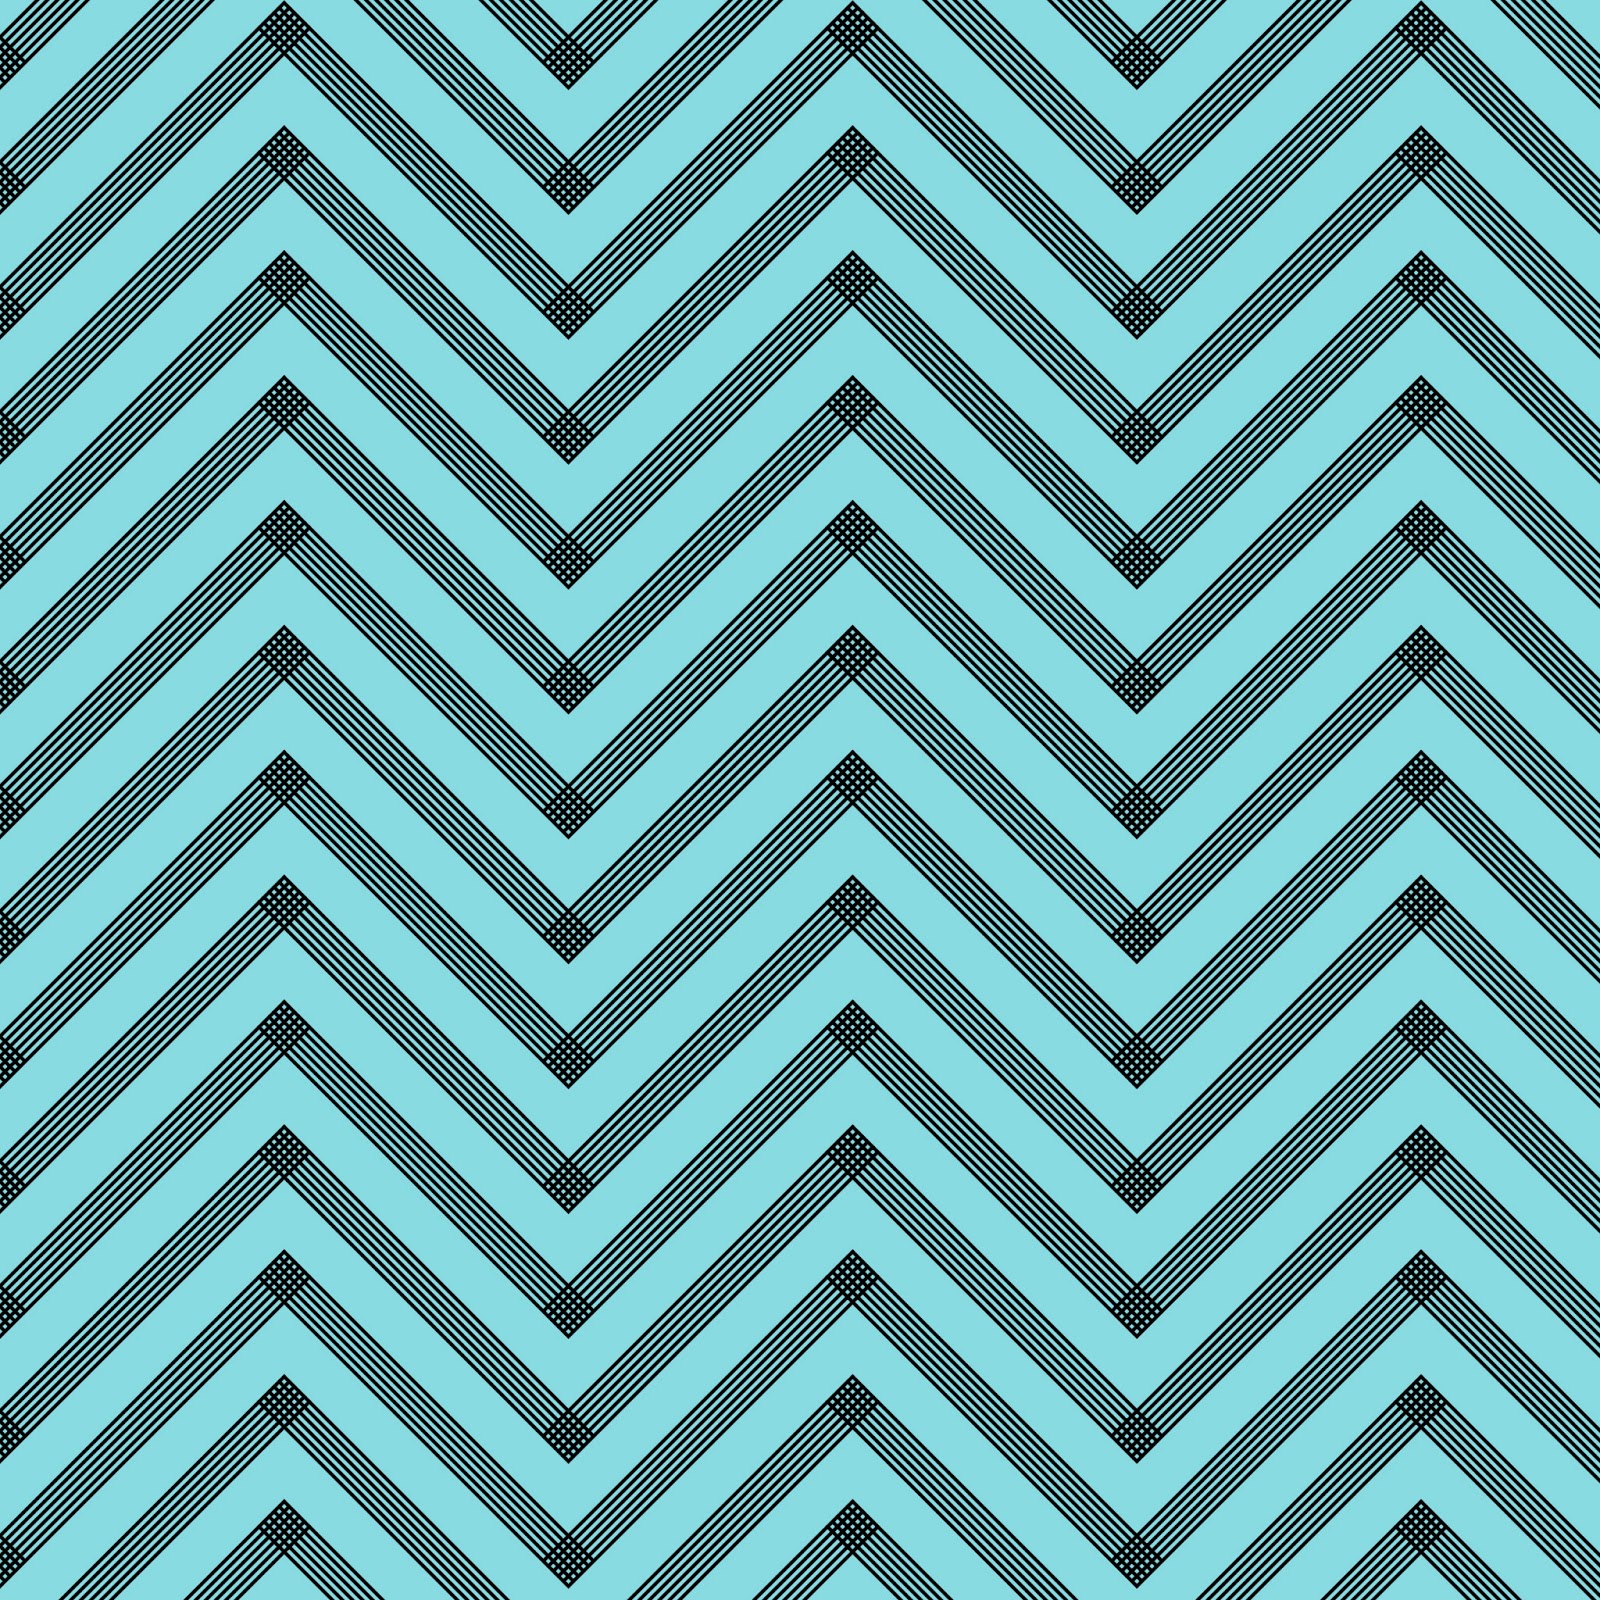 Coral And Mint Chevron Desktop Background Image Pictures Becuo